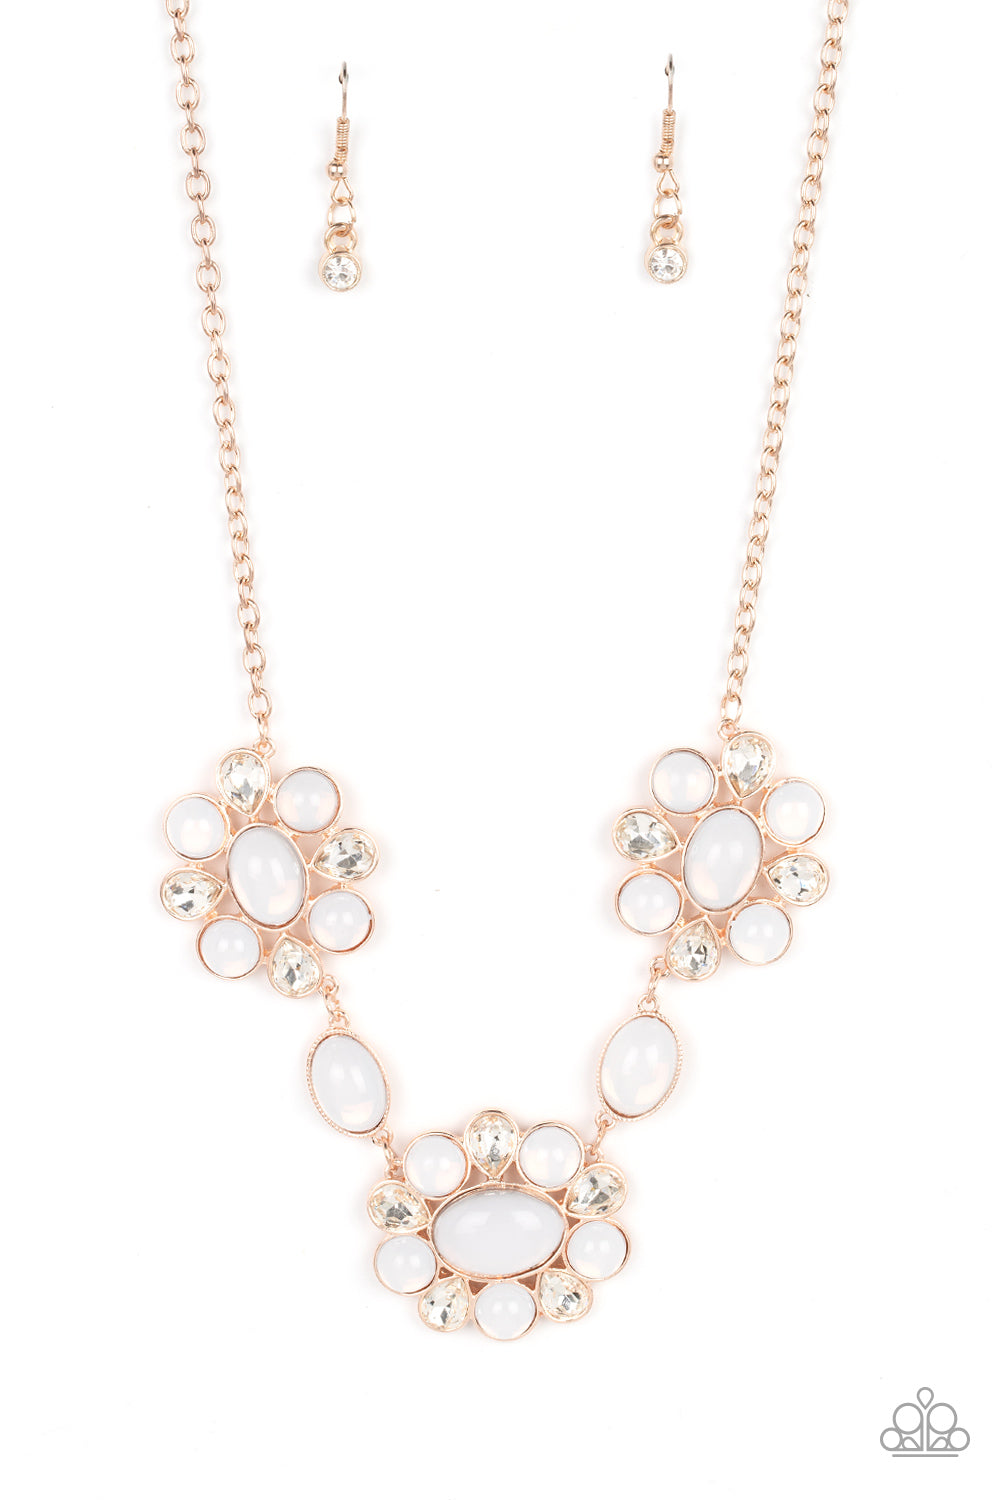 five-dollar-jewelry-your-chariot-awaits-rose-gold-paparazzi-accessories